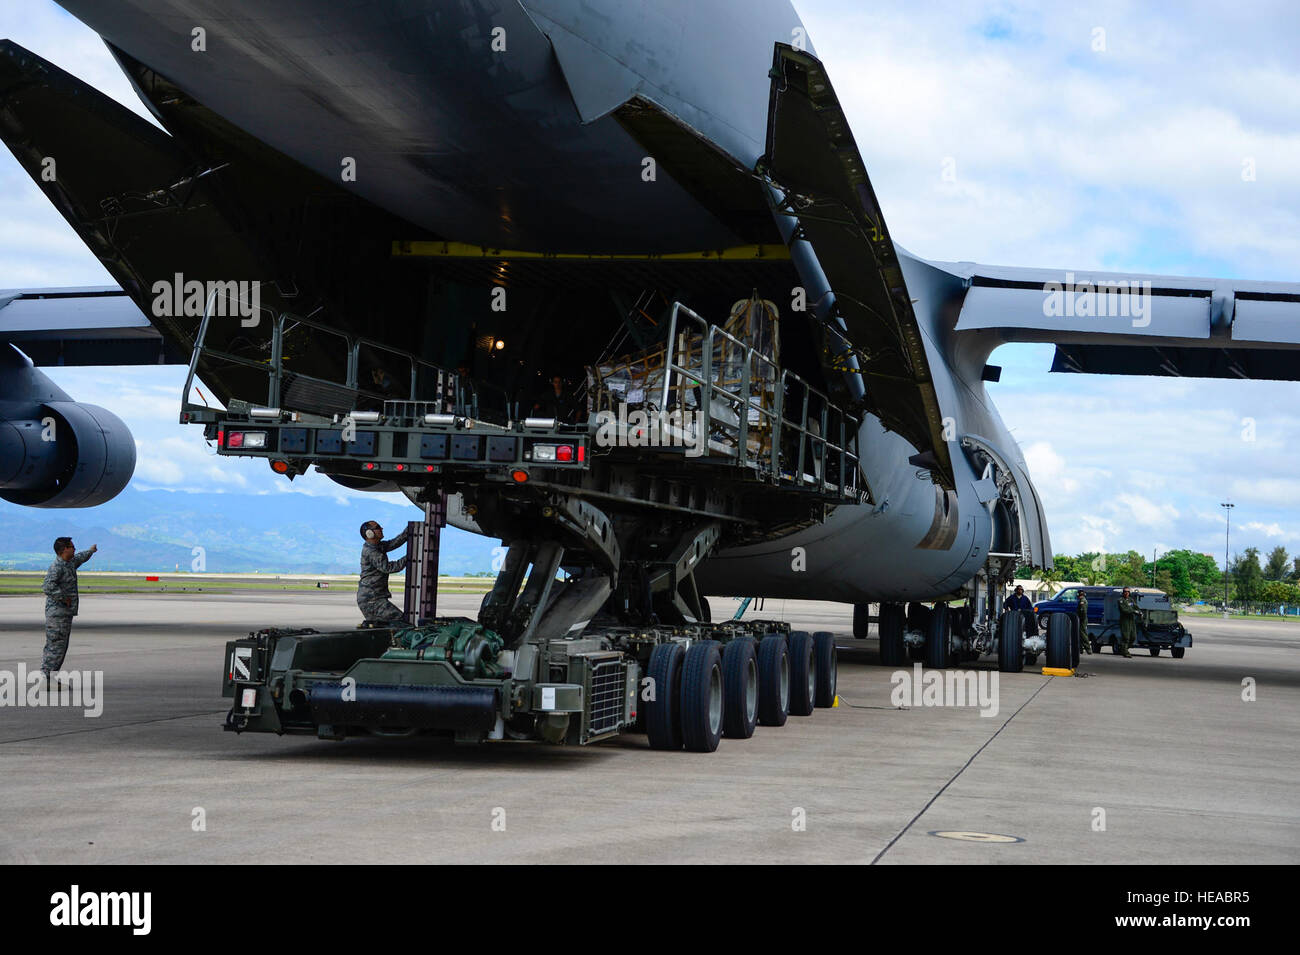 Crew members of a C-5 Galaxy from Westover Air Reserve Base, Mass., and members from the 612th Air Base Squadron unload a shipment of donated goods at Soto Cano Air Base, Honduras, Oct. 11, 2014. The cargo transporting aircraft delivered over 6,000-pounds of humanitarian aid and supplies that were donated to Honduran citizens in need through the Denton Program.  The Denton Program allows private U.S. citizens and organizations to use space available on U.S. military cargo planes to transport humanitarian goods to approved countries in need. Tech. Sgt. Heather Redman) Stock Photo